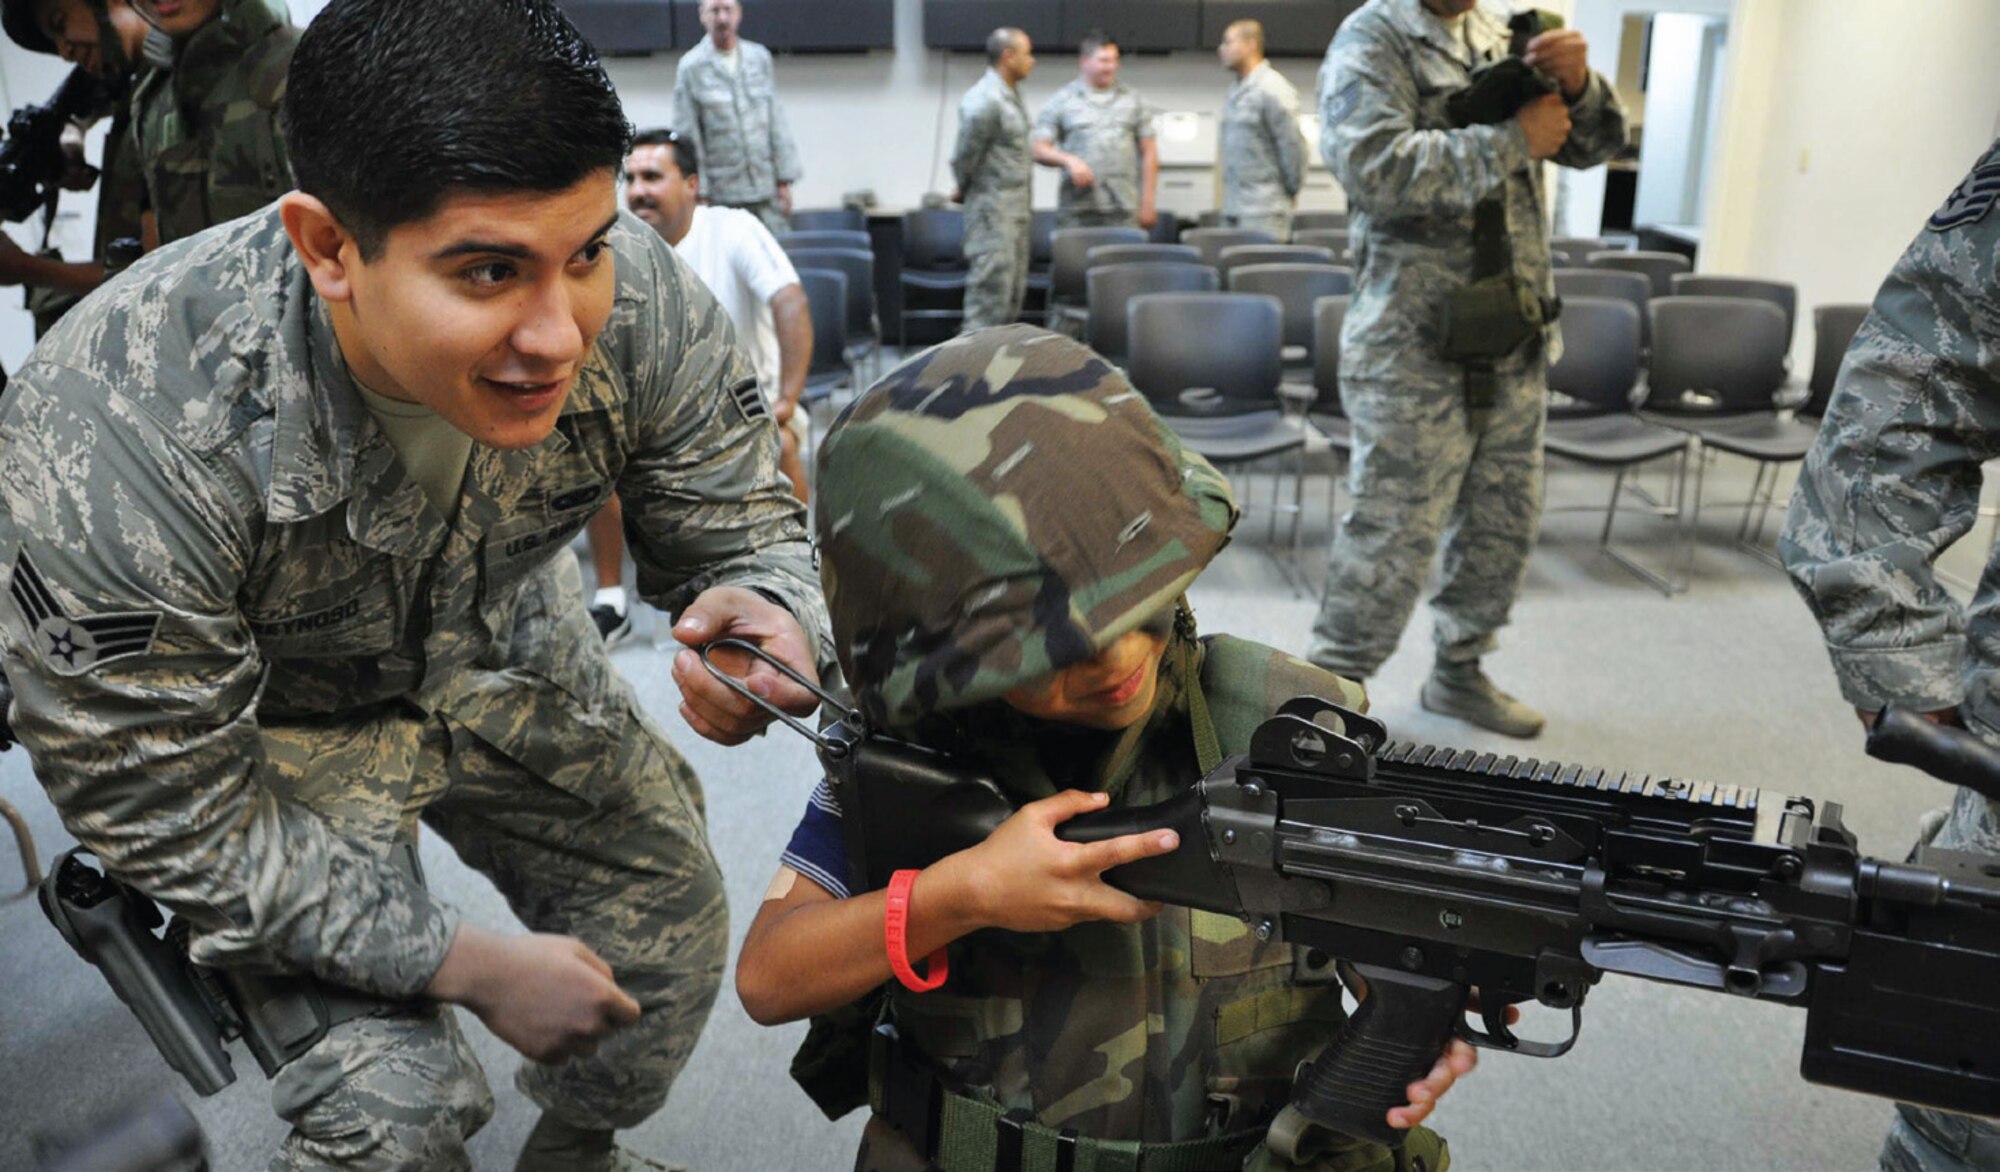 Senior Airman Andrew Reynoso, 452nd Security Forces Squadron, helps six-year-old Giovanni Medina get a clear sight picture as he holds on tight to the M240-Bravo Machine Gun. This, as well as other weapons, was on display during the Logistics Readiness Squadron’s Operation Family First event held in Building 385, July 13. (U.S. Air Force photo/Staff Sgt. Joe Davidson)